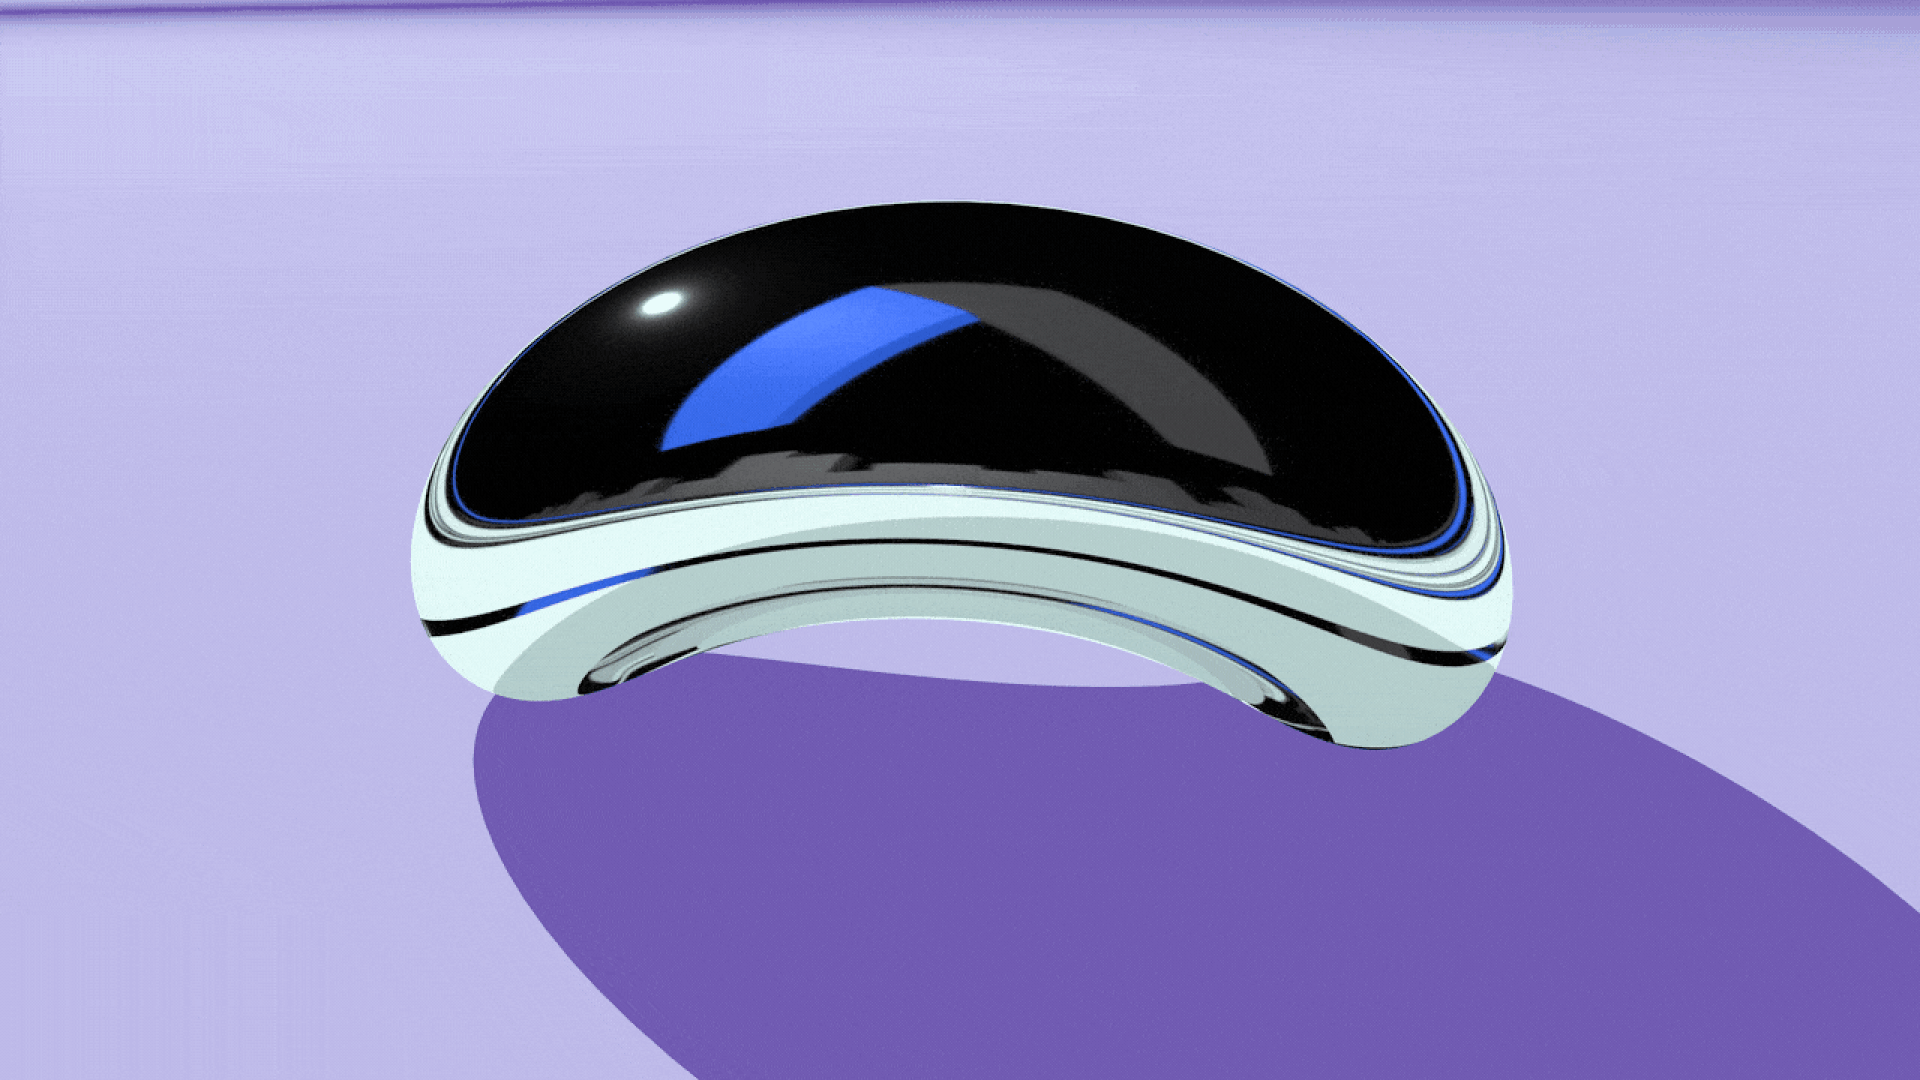 Illustration of the Chicago Cloud Gate bean sculpture rotating and reflecting the Axios logo.